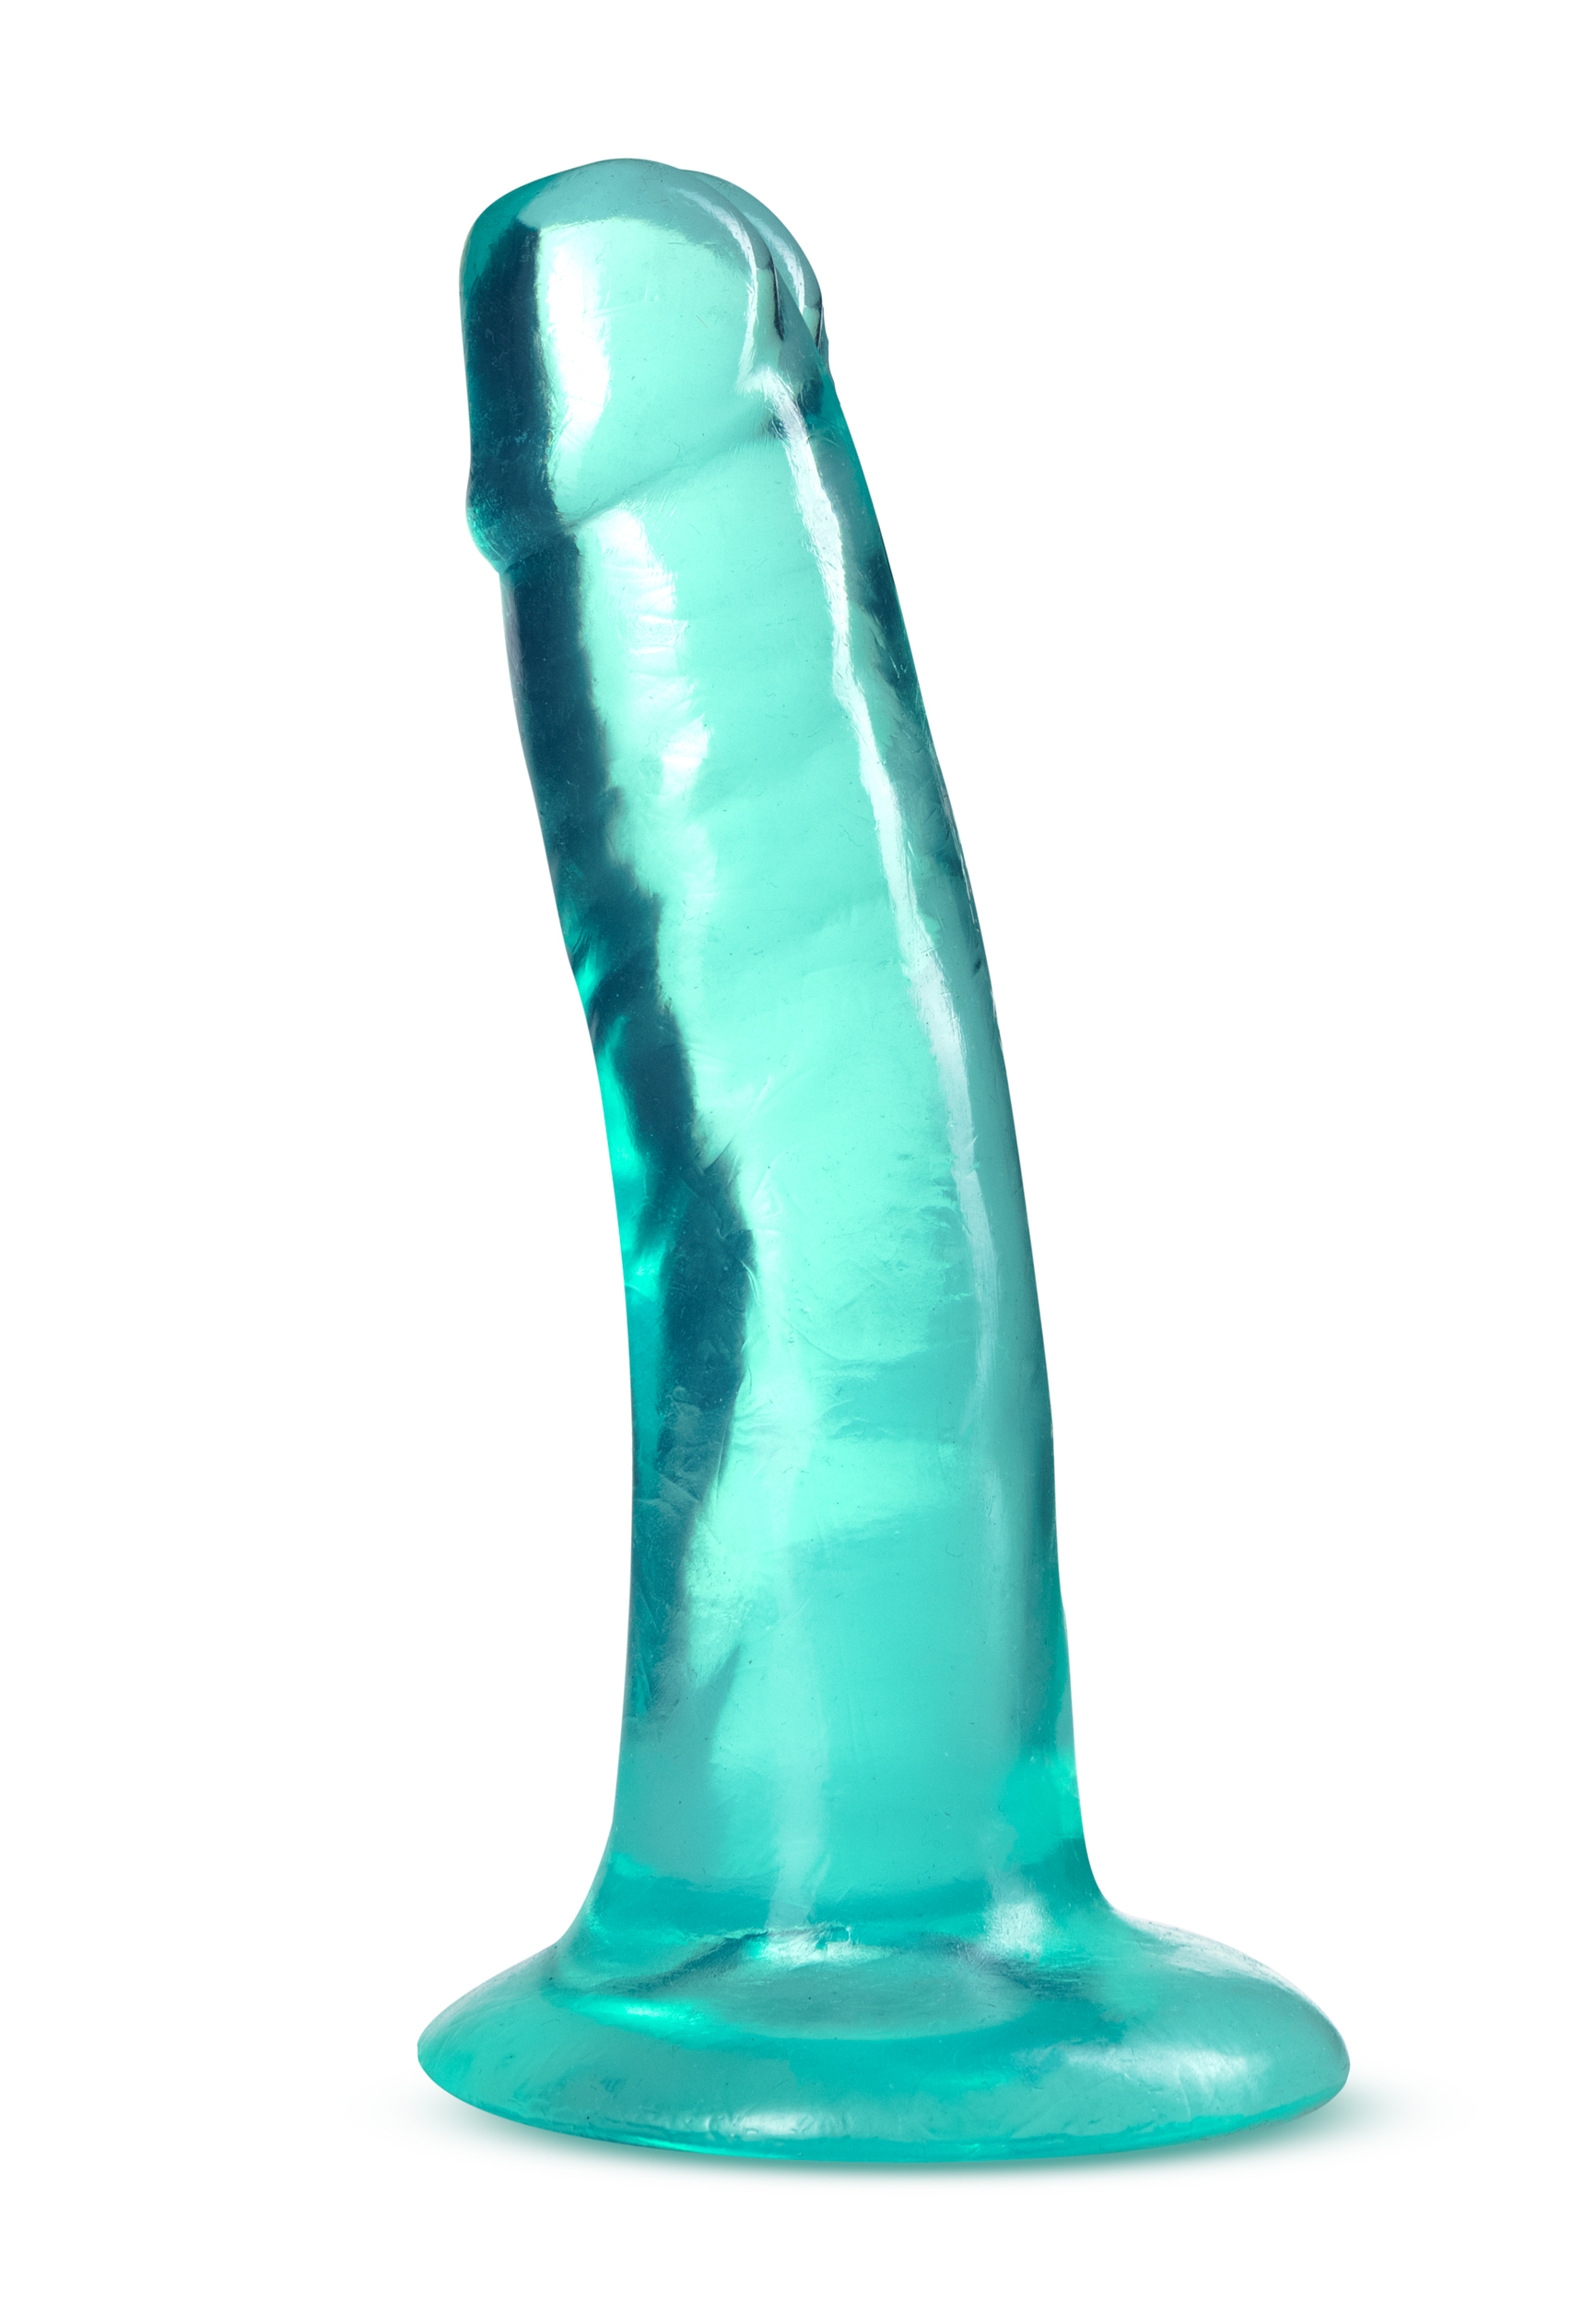 suction cup dildo, dildo with suction cup